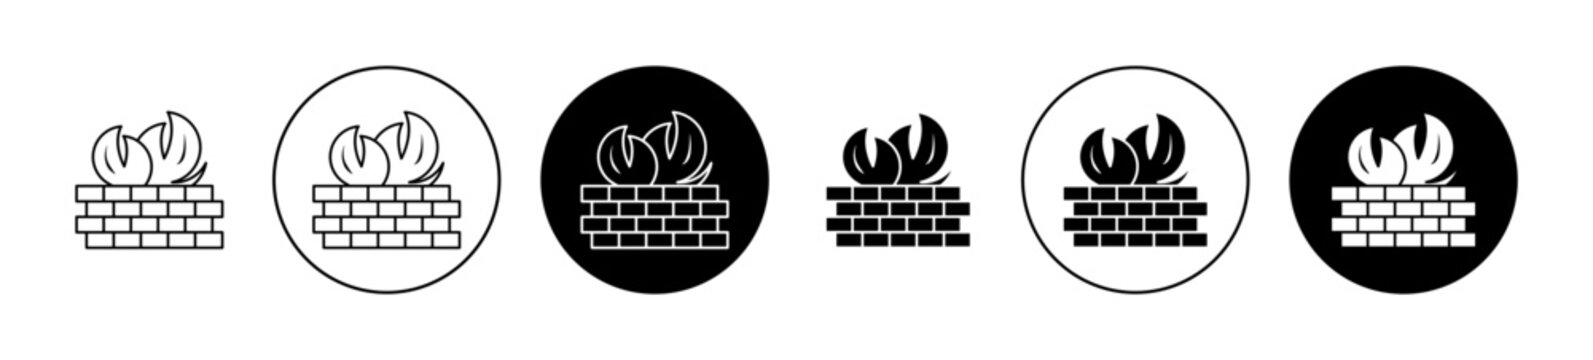 Brick wall and fire Vector Icon Set. Computer firewall symbol in black filled and outlined style.